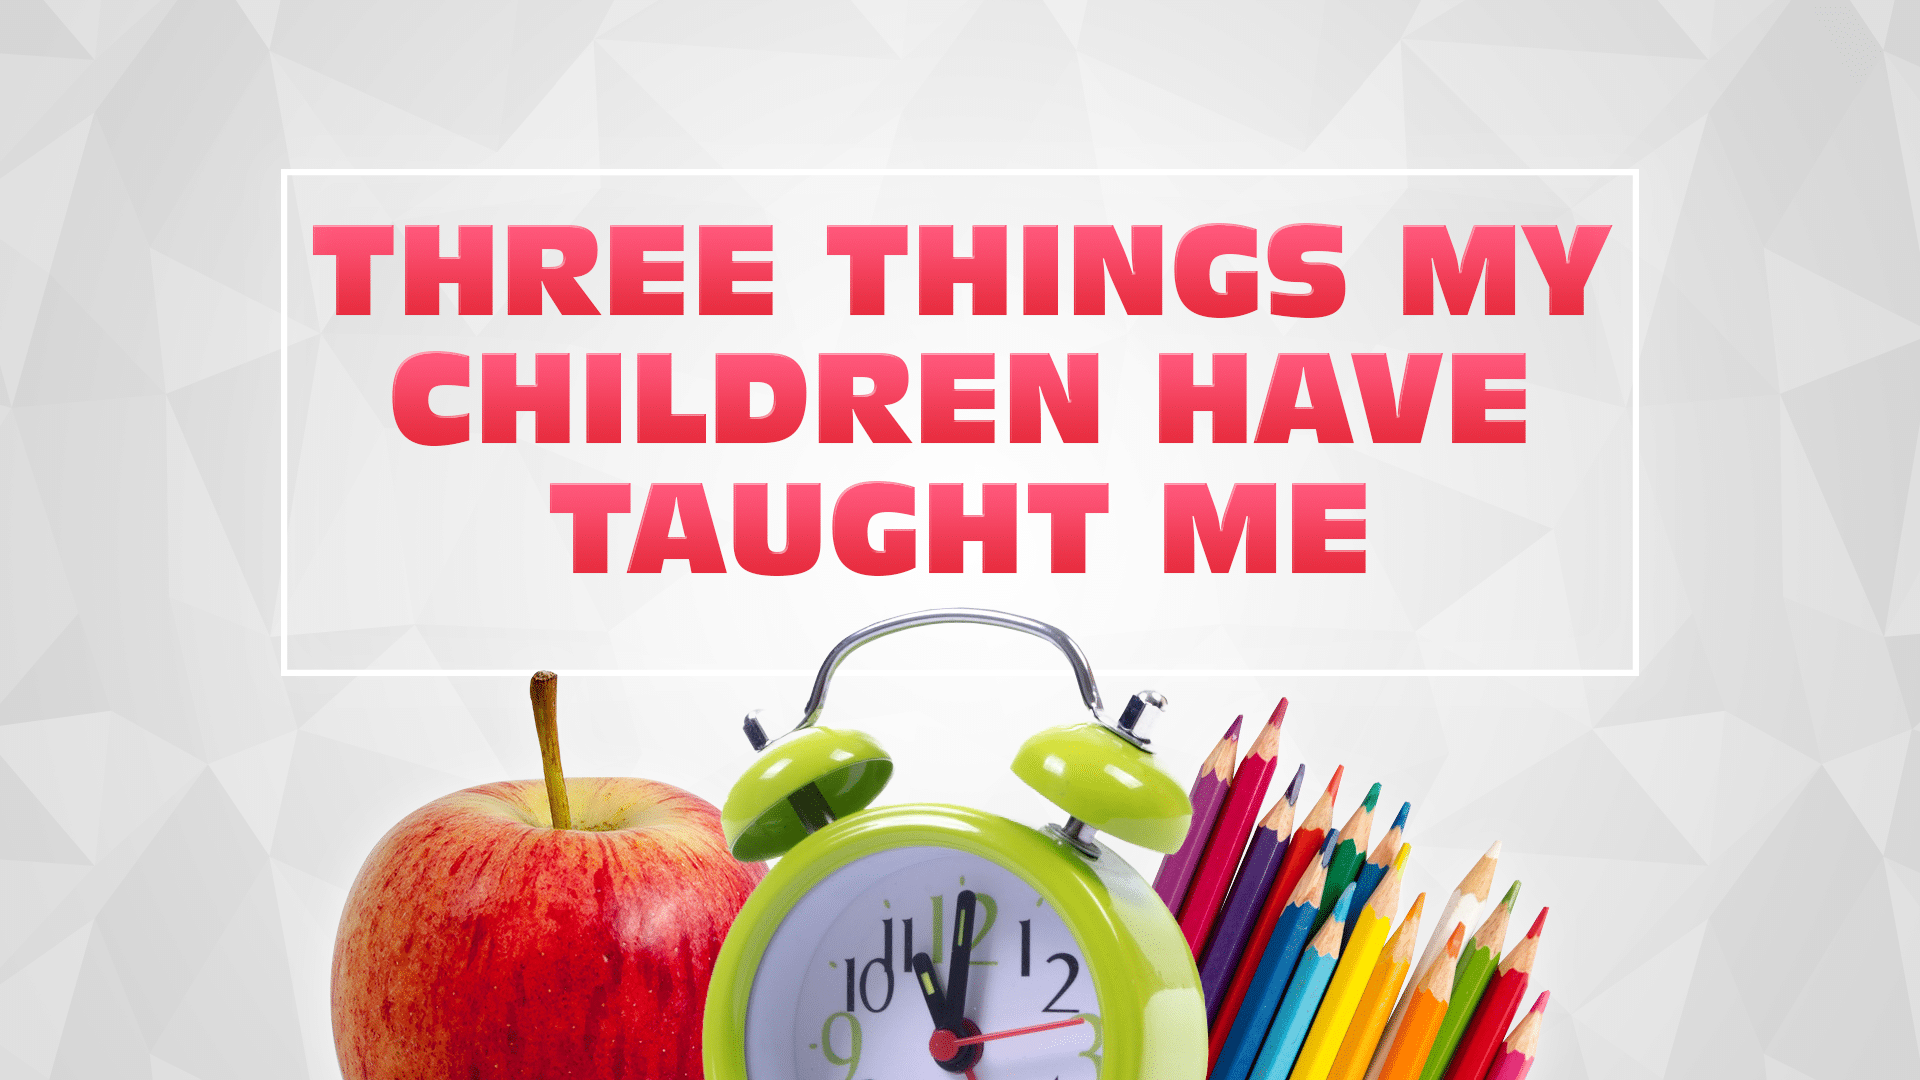 Three Things My Children Have Taught Me